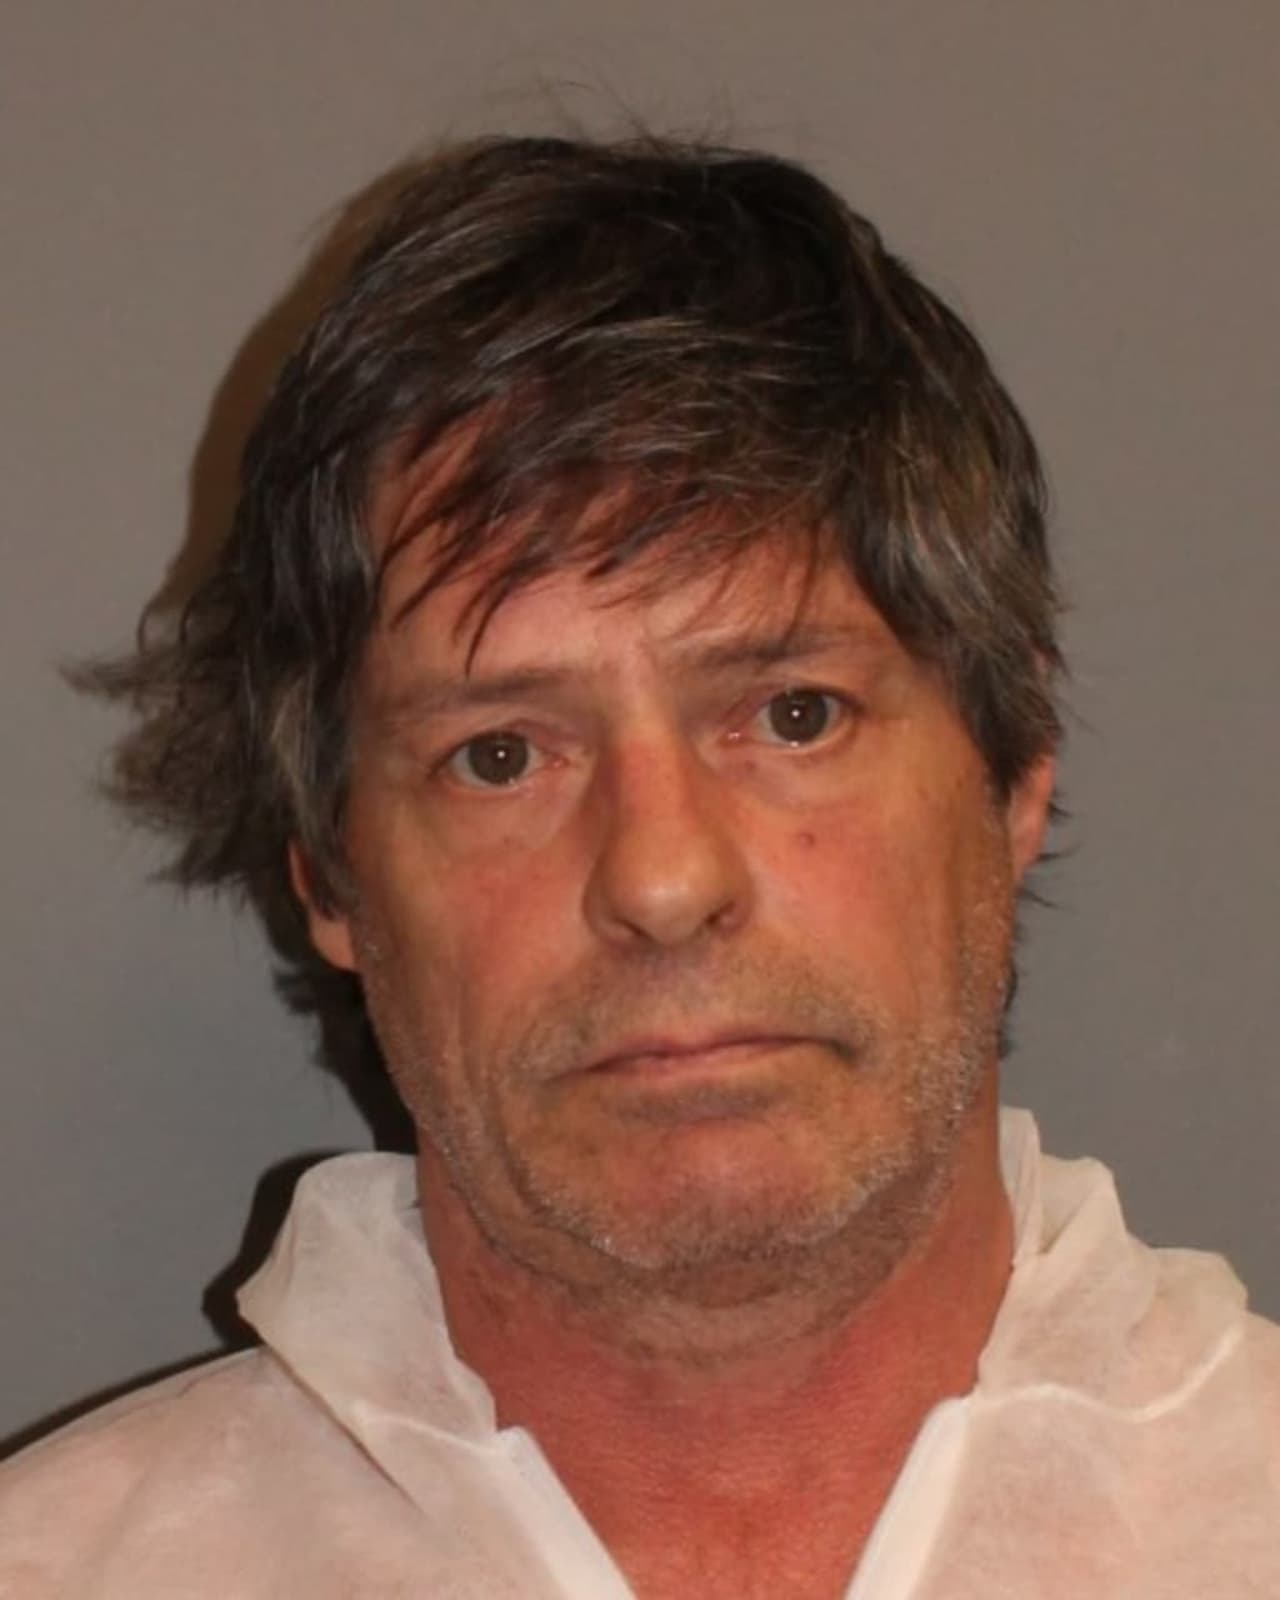 Paul Bjerke is charged in the death of a Norwalk woman who died of a blunt impact injury to her head.